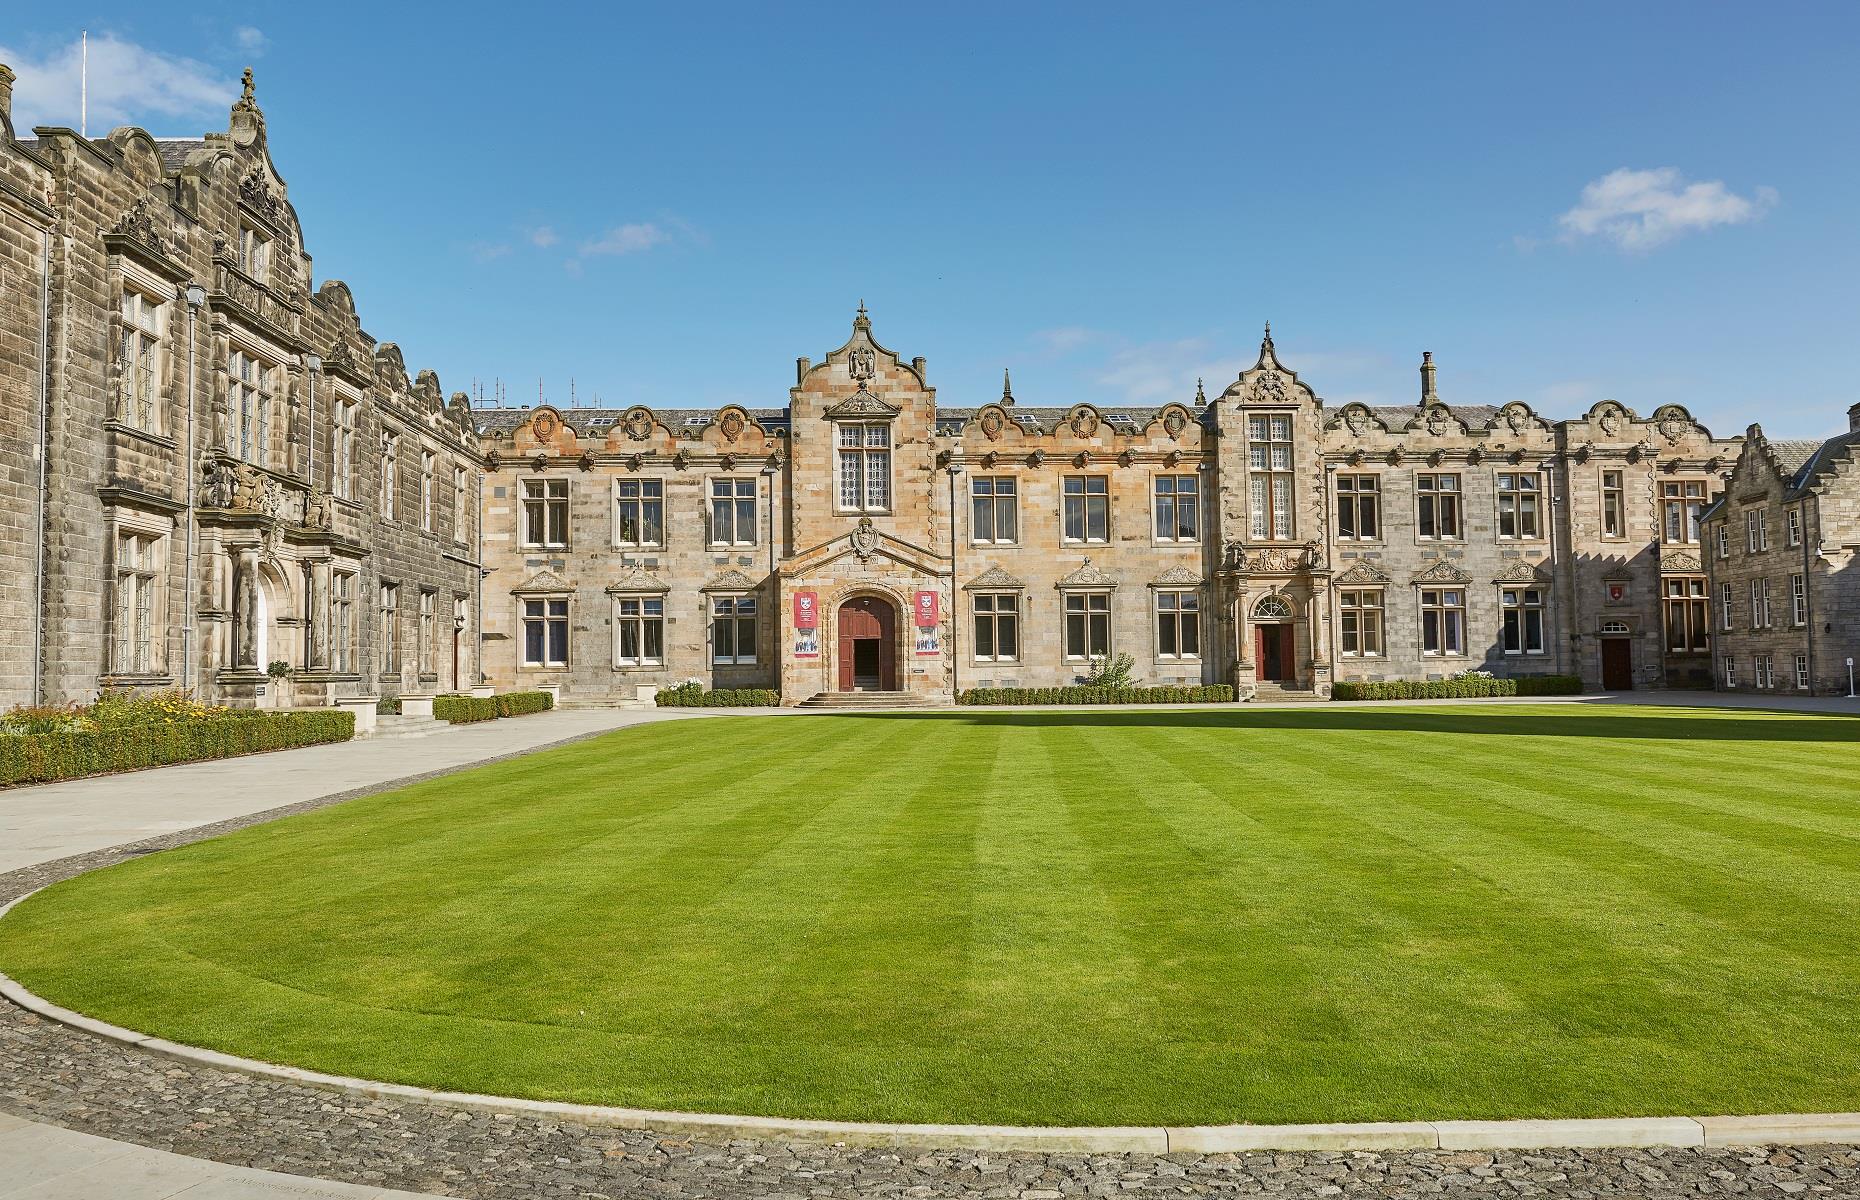 <p>Founded in the 15th century, the <a href="https://www.st-andrews.ac.uk/">University of St Andrews</a> is home to some truly spectacular buildings, including St Salvator's Chapel and Sallies Quad (pictured). It also happens to be mere moments from Scotland's enviable coastline. Famous alumni include Benjamin Franklin, Rudyard Kipling, Prince William and his wife, the Duchess of Cambridge.</p>  <p><a href="https://www.loveexploring.com/gallerylist/71852/30-of-britains-most-historic-towns-and-cities"><strong>Discover more of Britain's most historic towns and cities</strong></a></p>